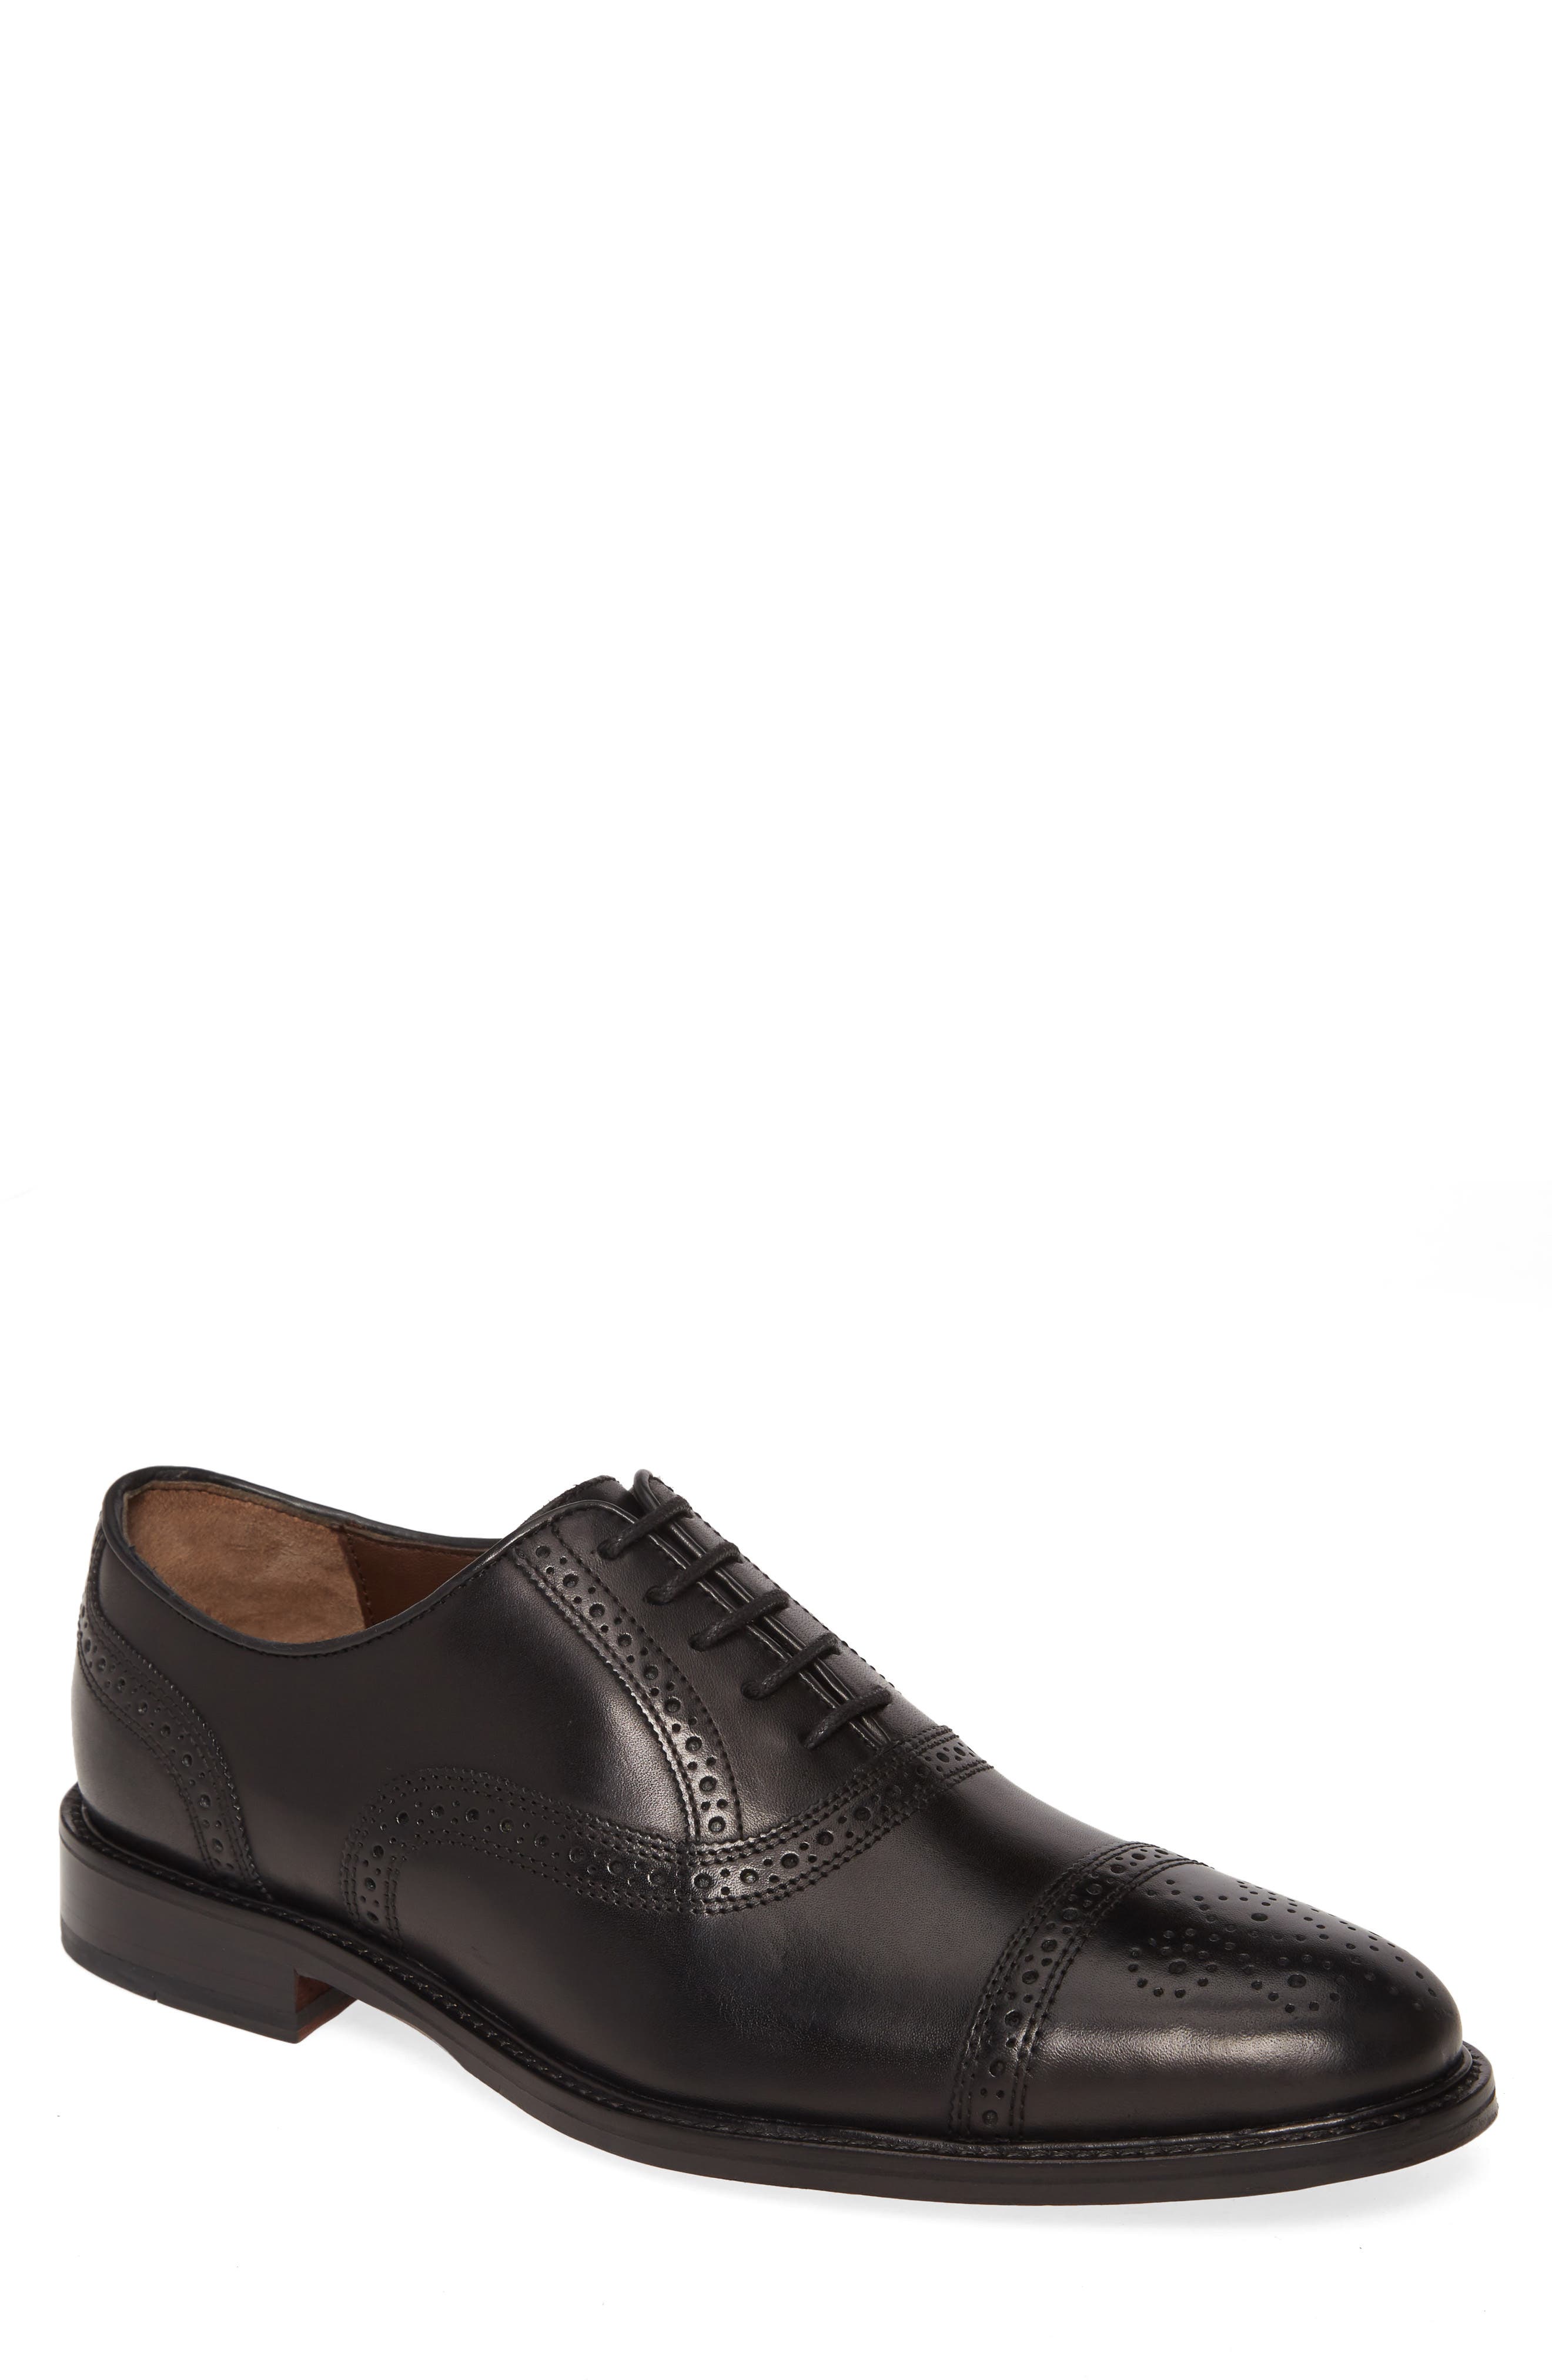 mens black dress shoes with gold accents